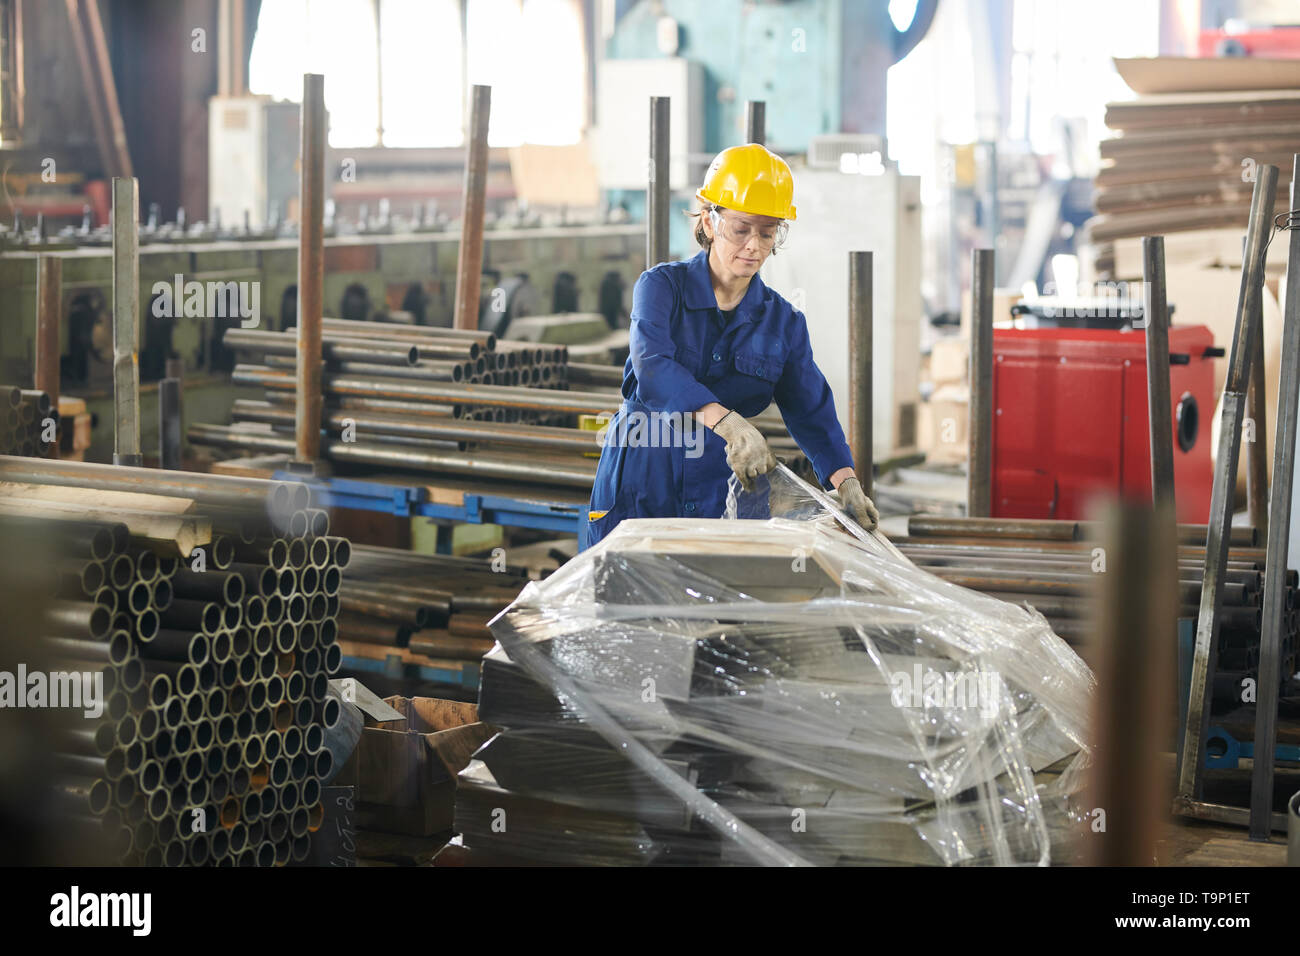 Female Worker in Warehouse Stock Photo